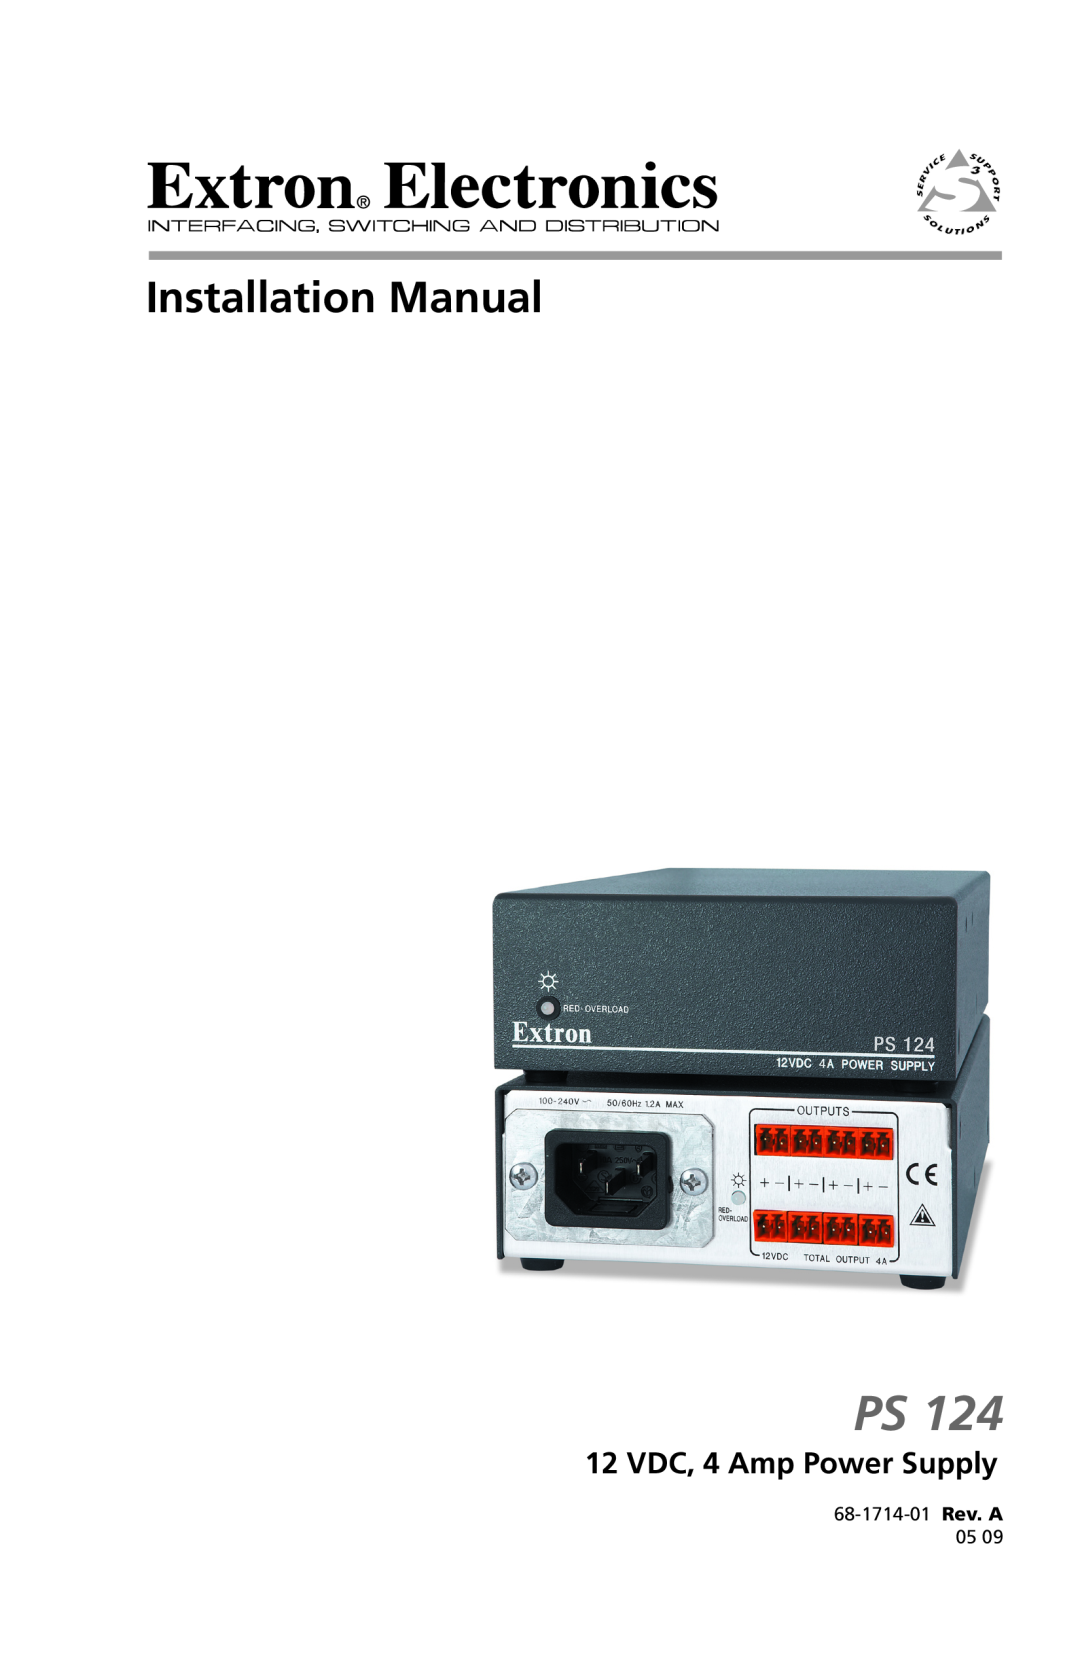 Extron electronic PS 124 installation manual 12 VDC, 4 Amp Power Supply, Installation Manual, 68-1714-01 Rev. A 